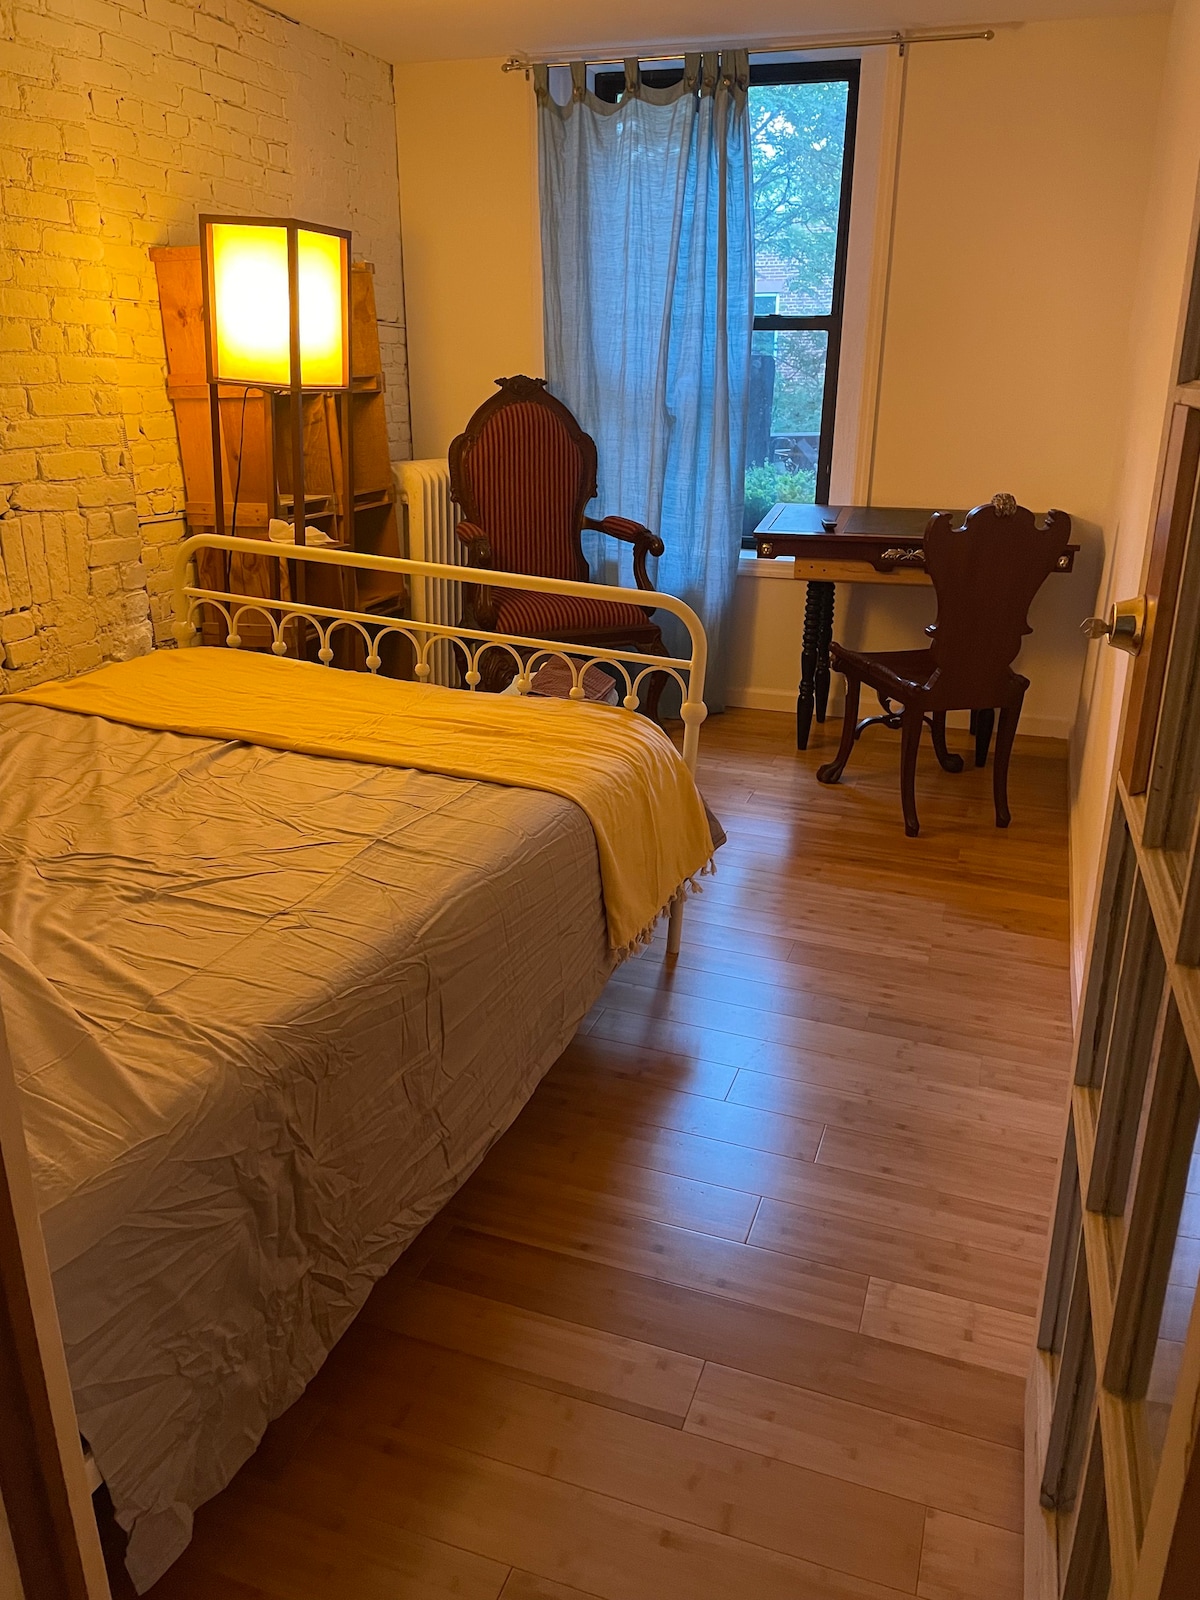 A private room in brooklyn heights